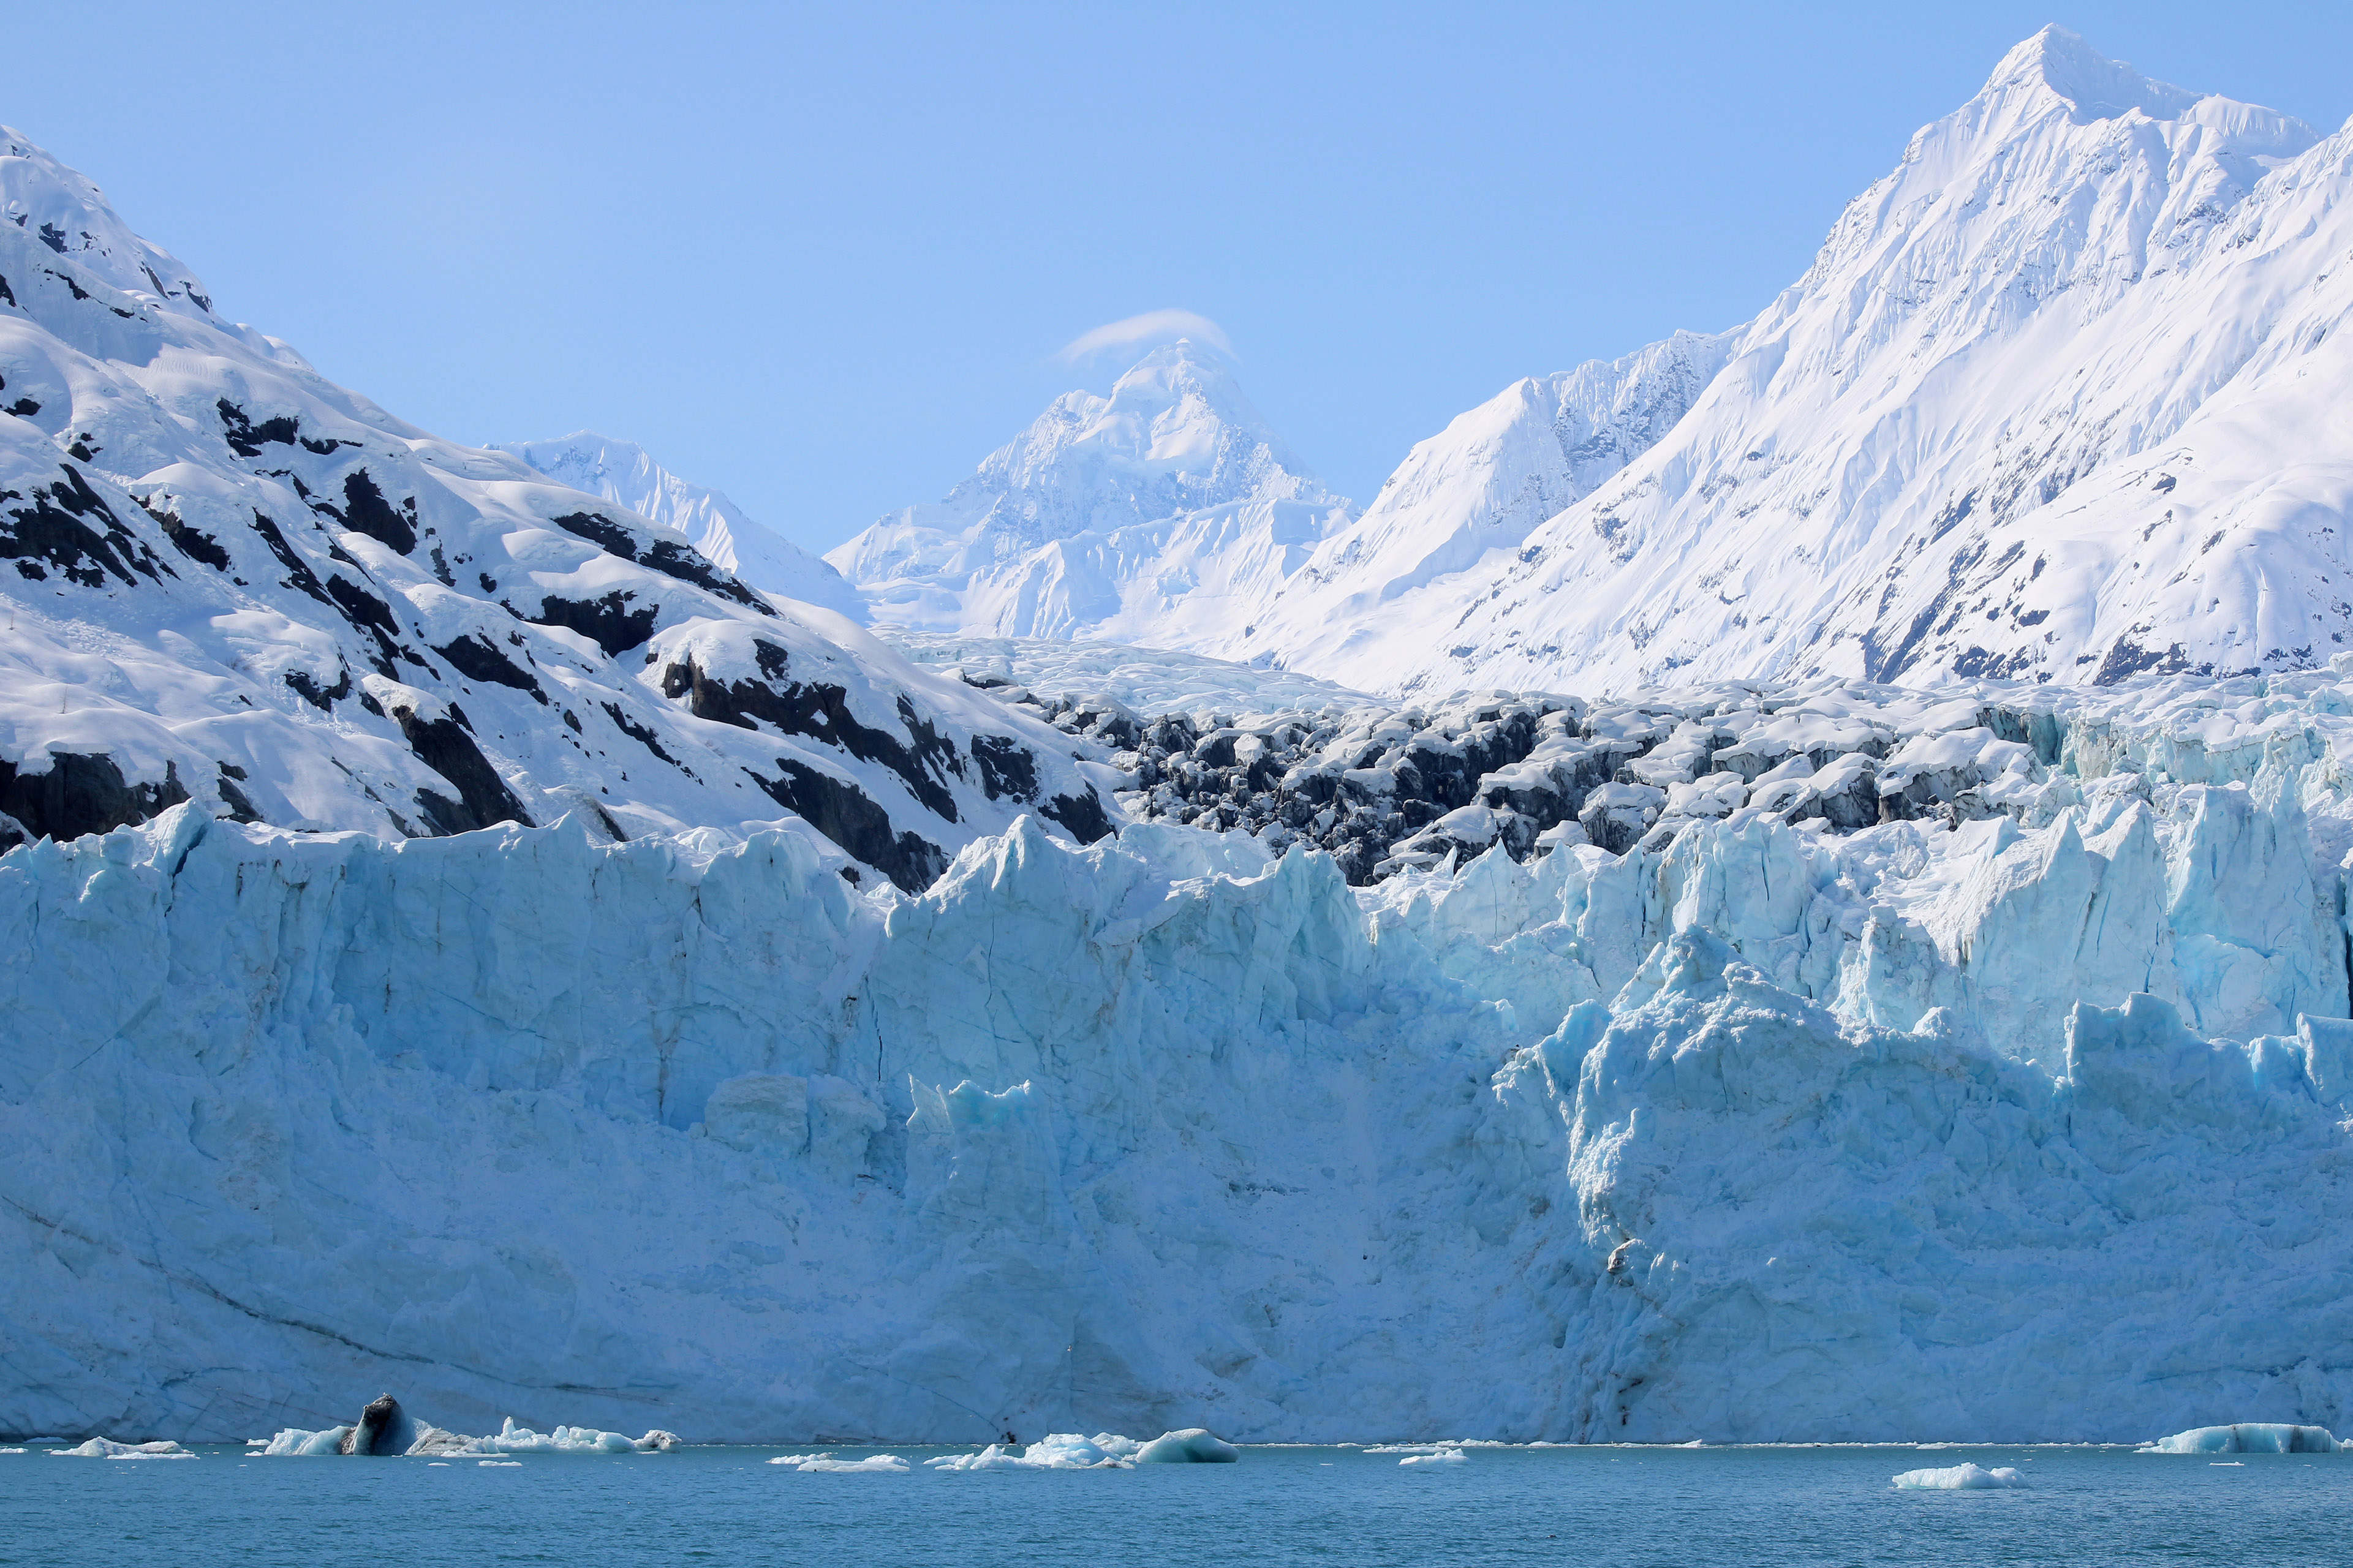 Bright blue ice is covered in white snow with snowcapped mountains surrounding the scene.